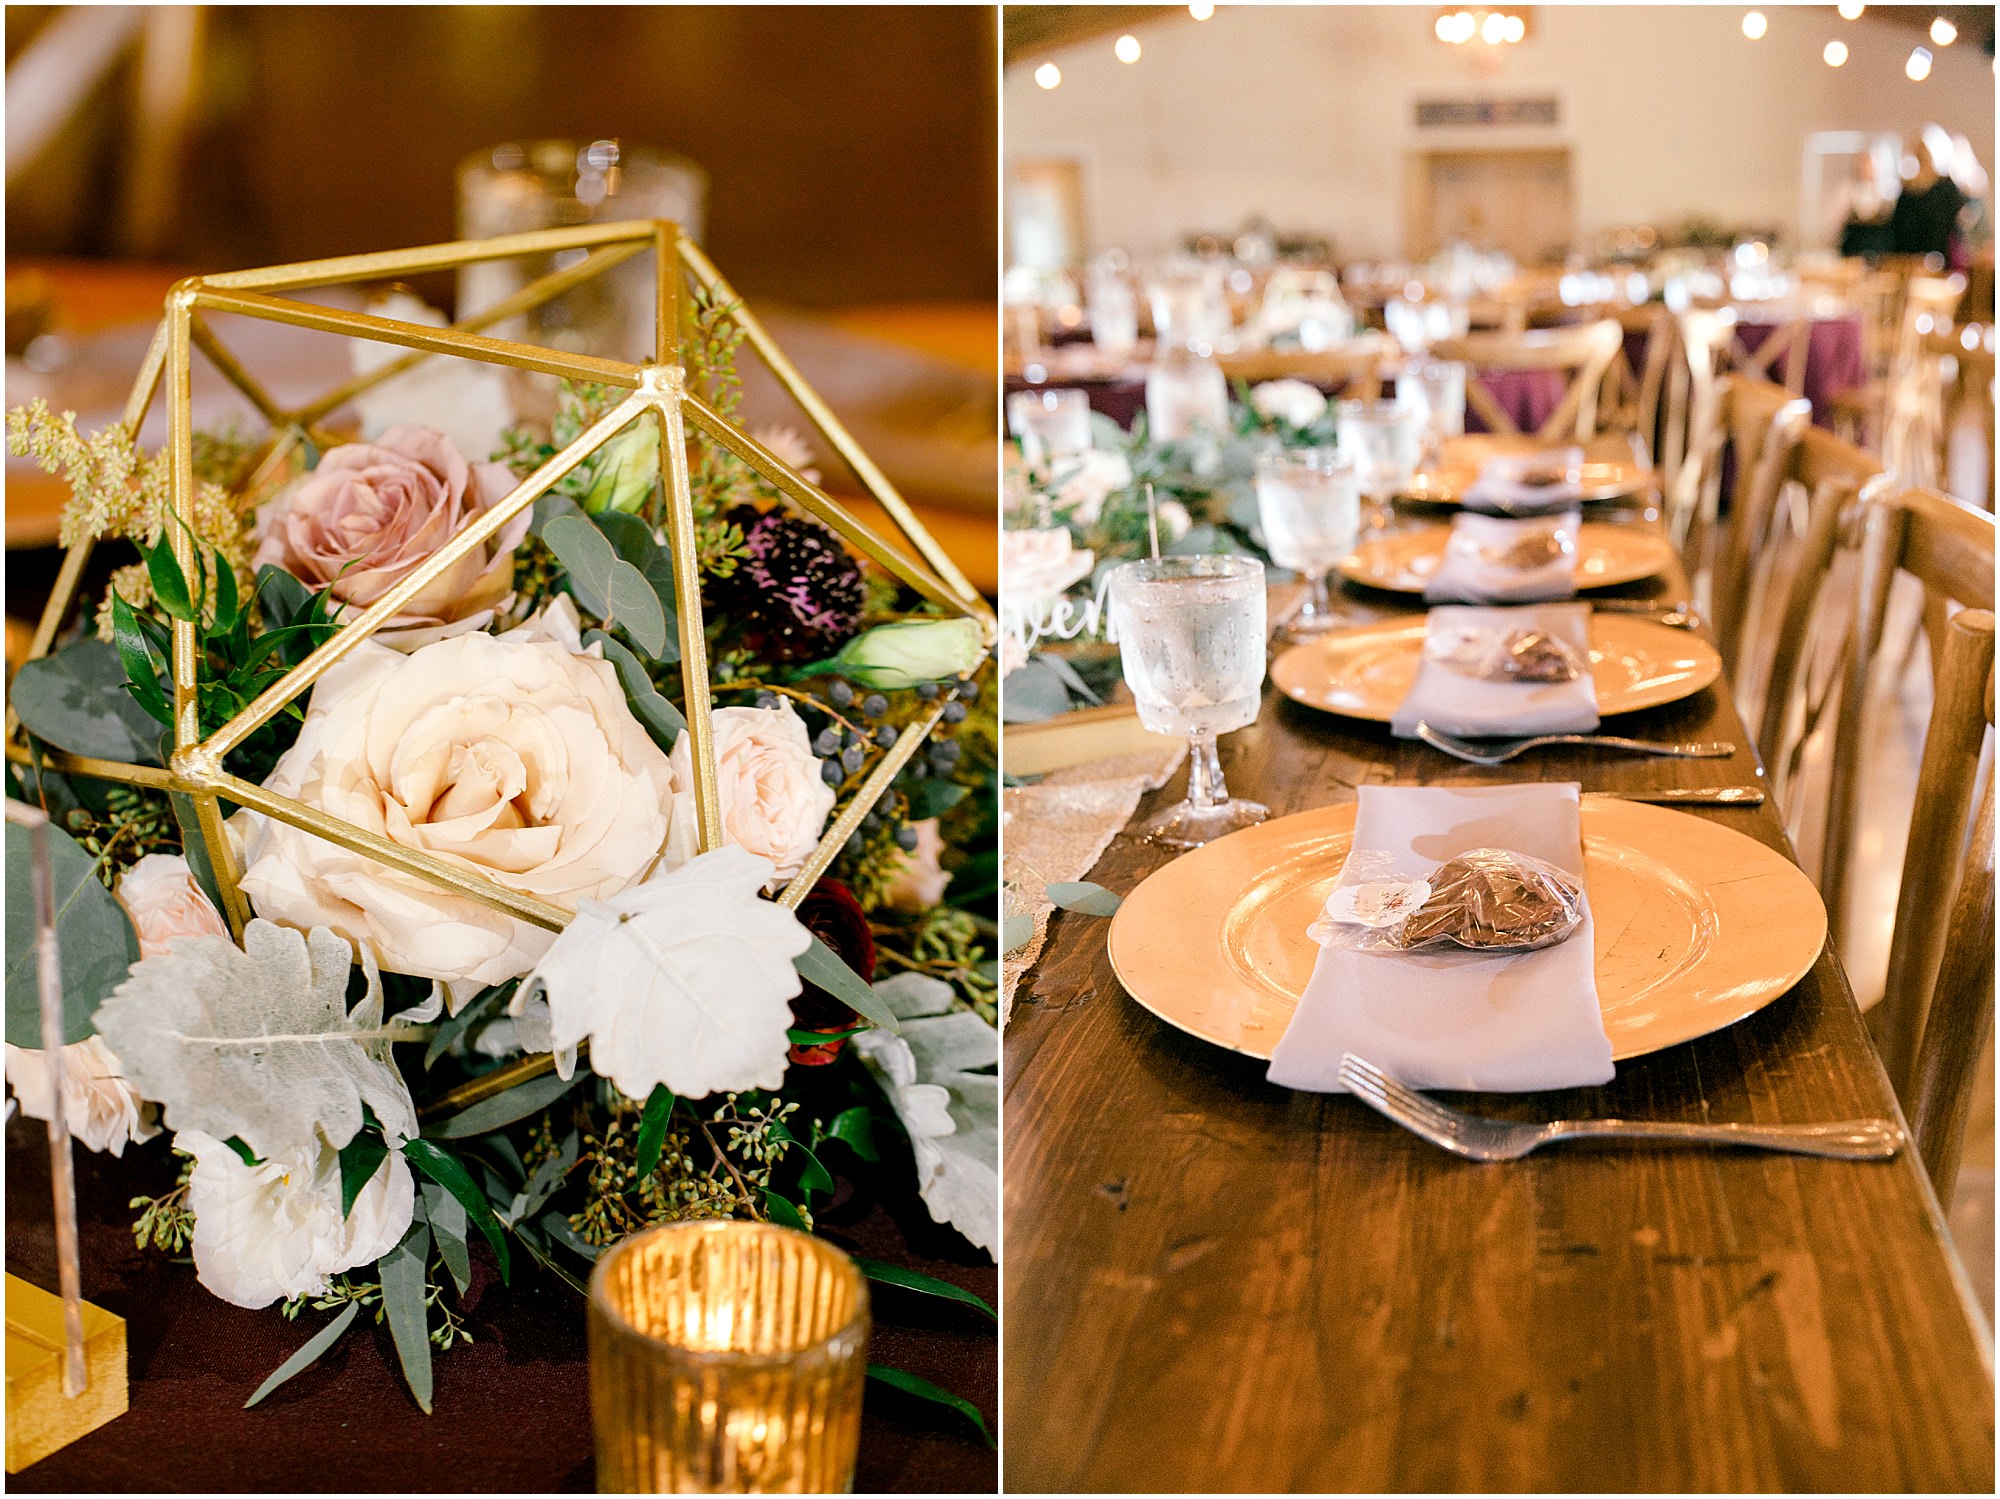 Reception decor with table linens in the shade of dusty rose